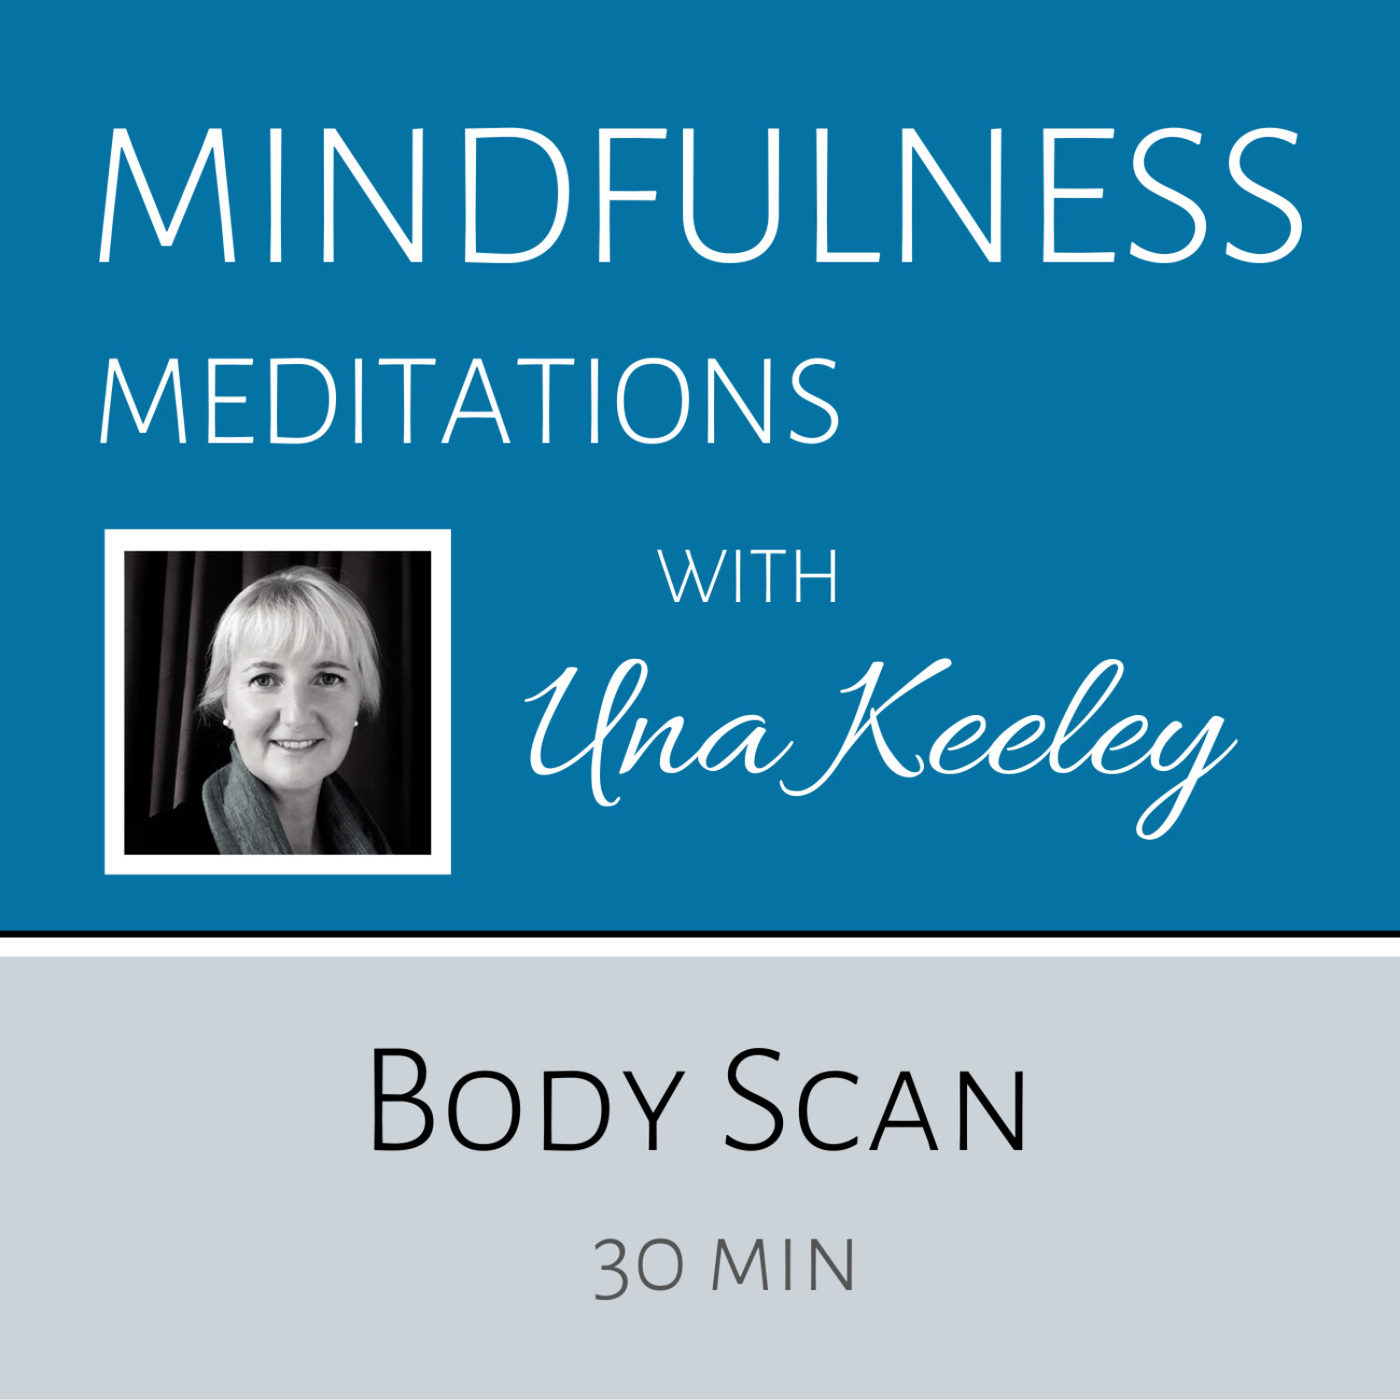 How to Do Body Scan Meditation and Its Benefits